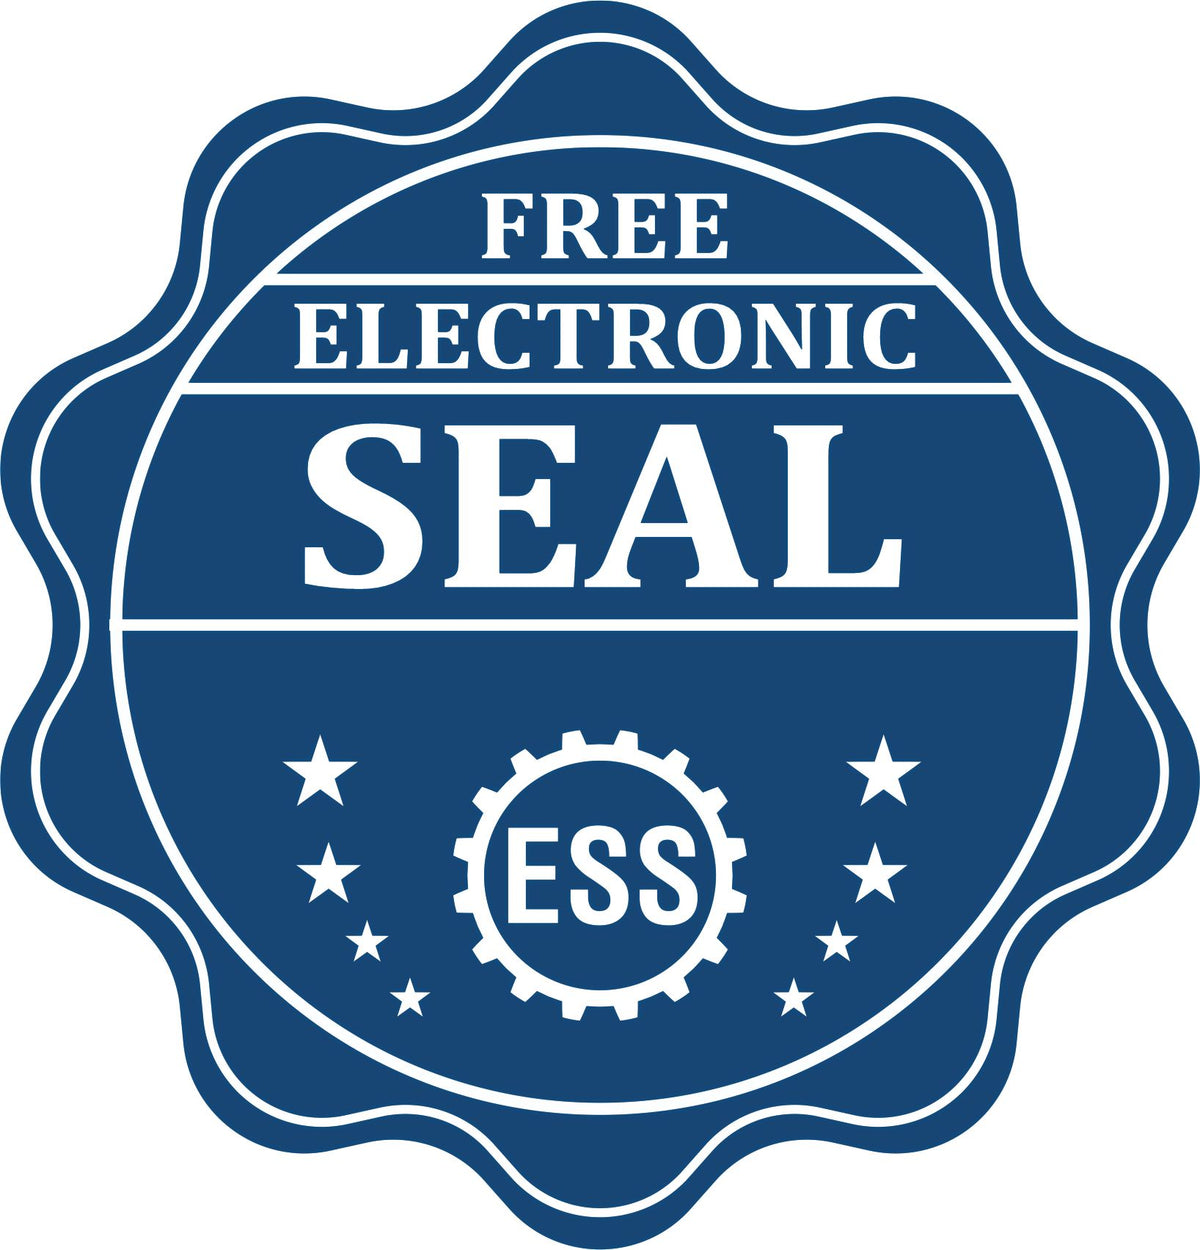 A badge showing a free electronic seal for the Slim Pre-Inked New Hampshire Land Surveyor Seal Stamp with stars and the ESS gear on the emblem.